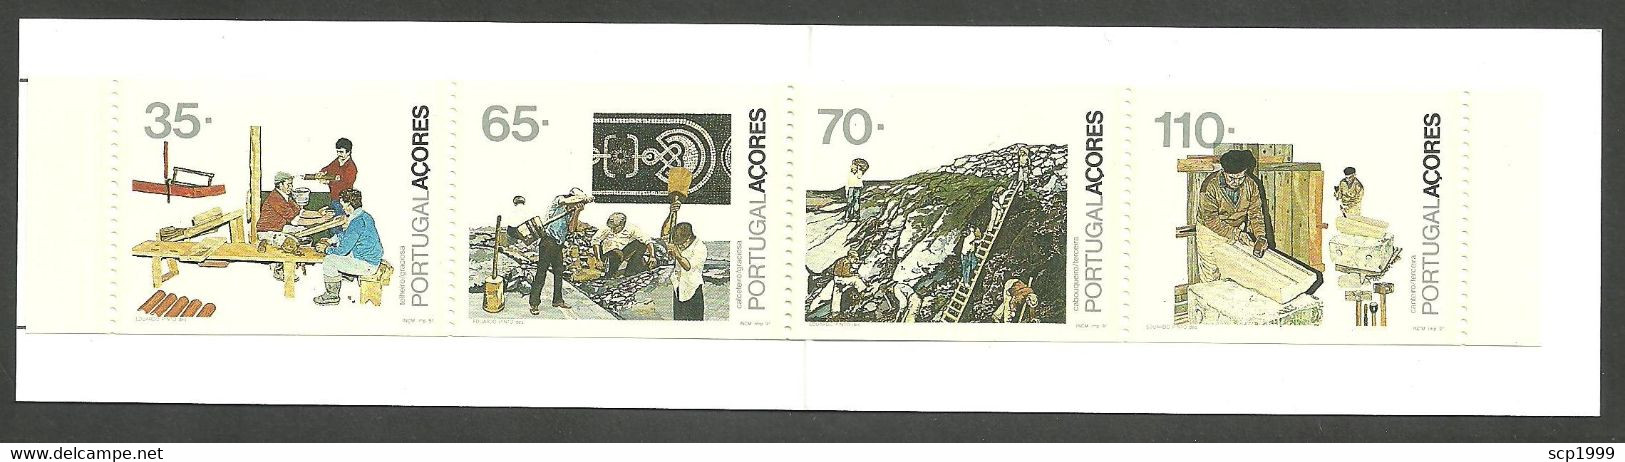 Portugal 1991 - Azores Typical Jobs Booklet MNH - Libretti